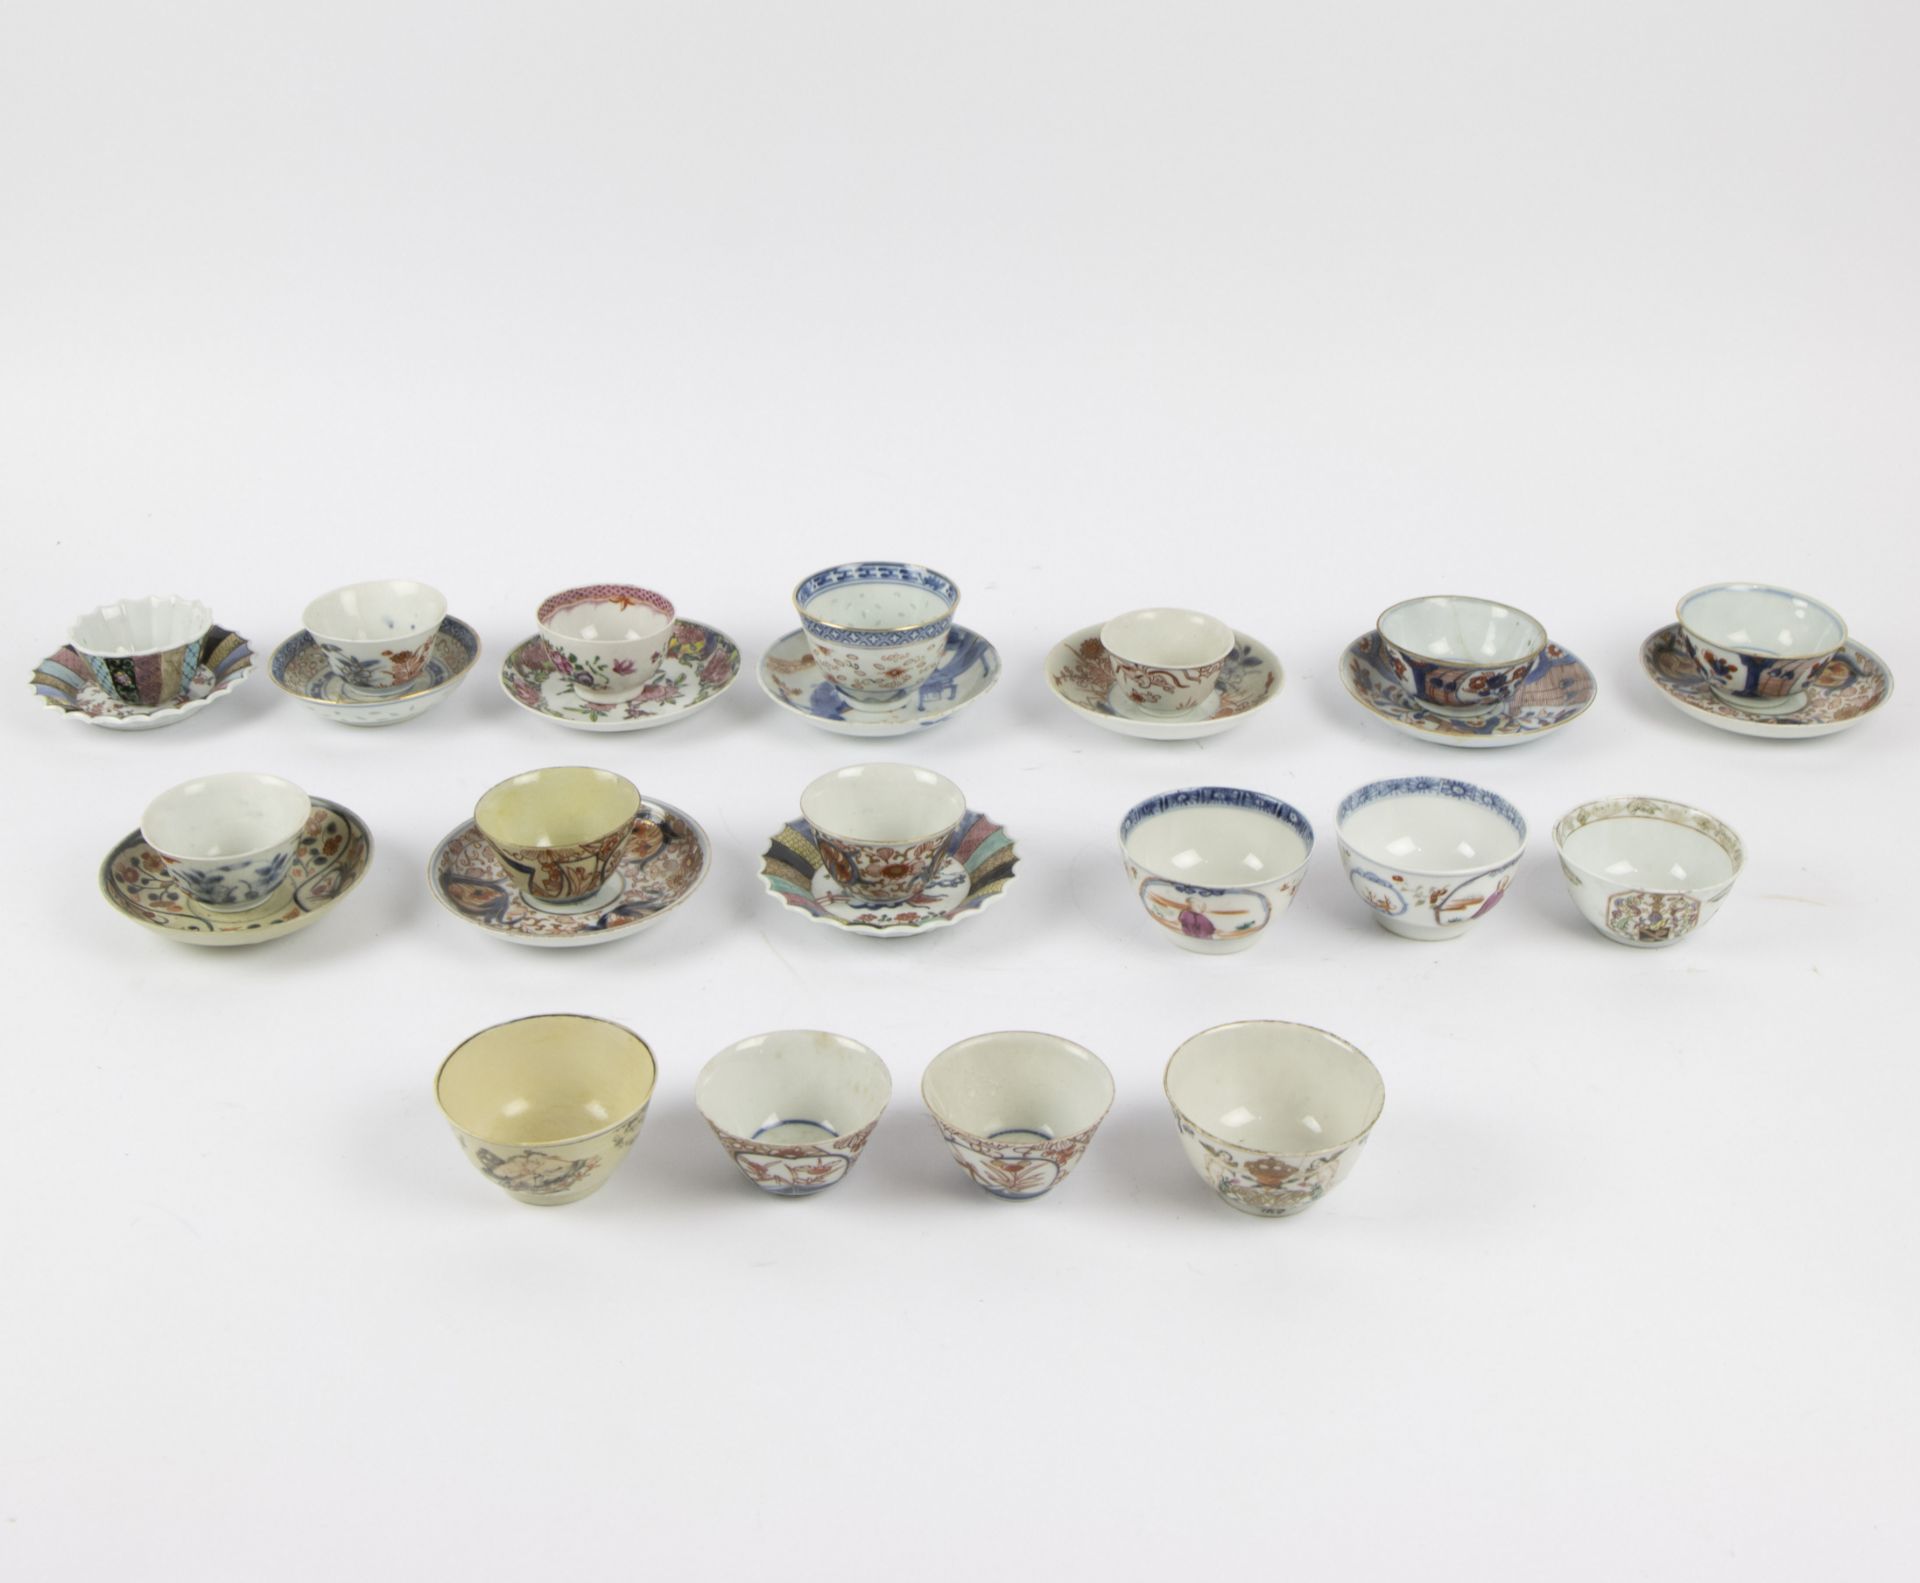 A collection of Chinese cups and saucers 18th century